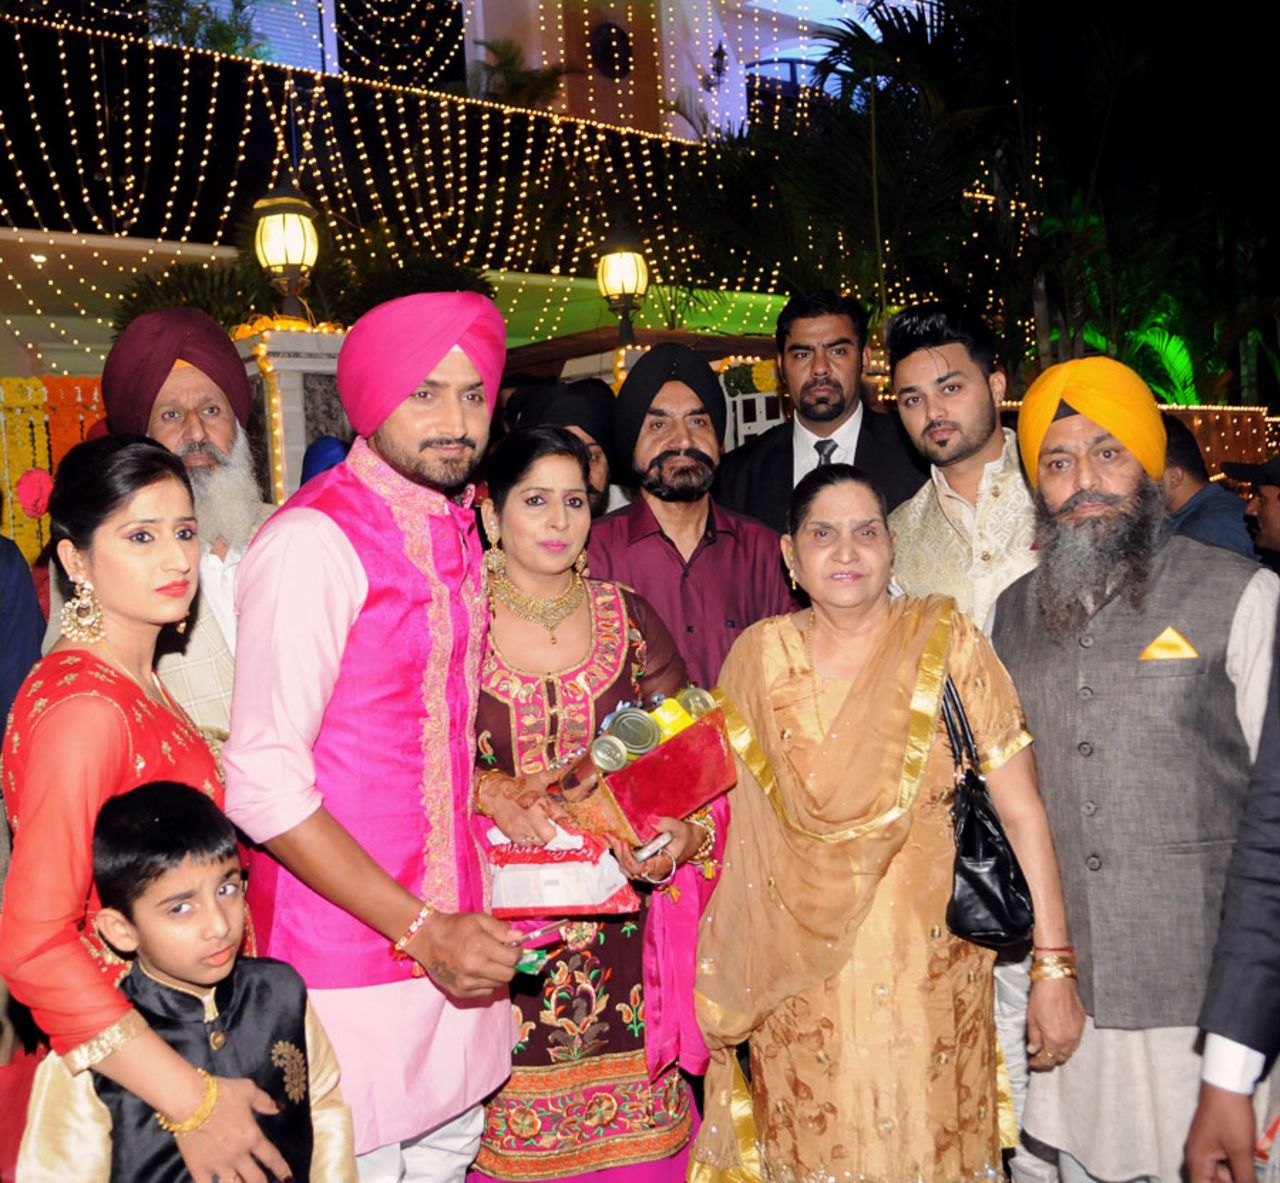 Soon-to-be married Harbhajan Singh with his family at a pre-wedding ceremony, Jalandhar, October 27, 2015